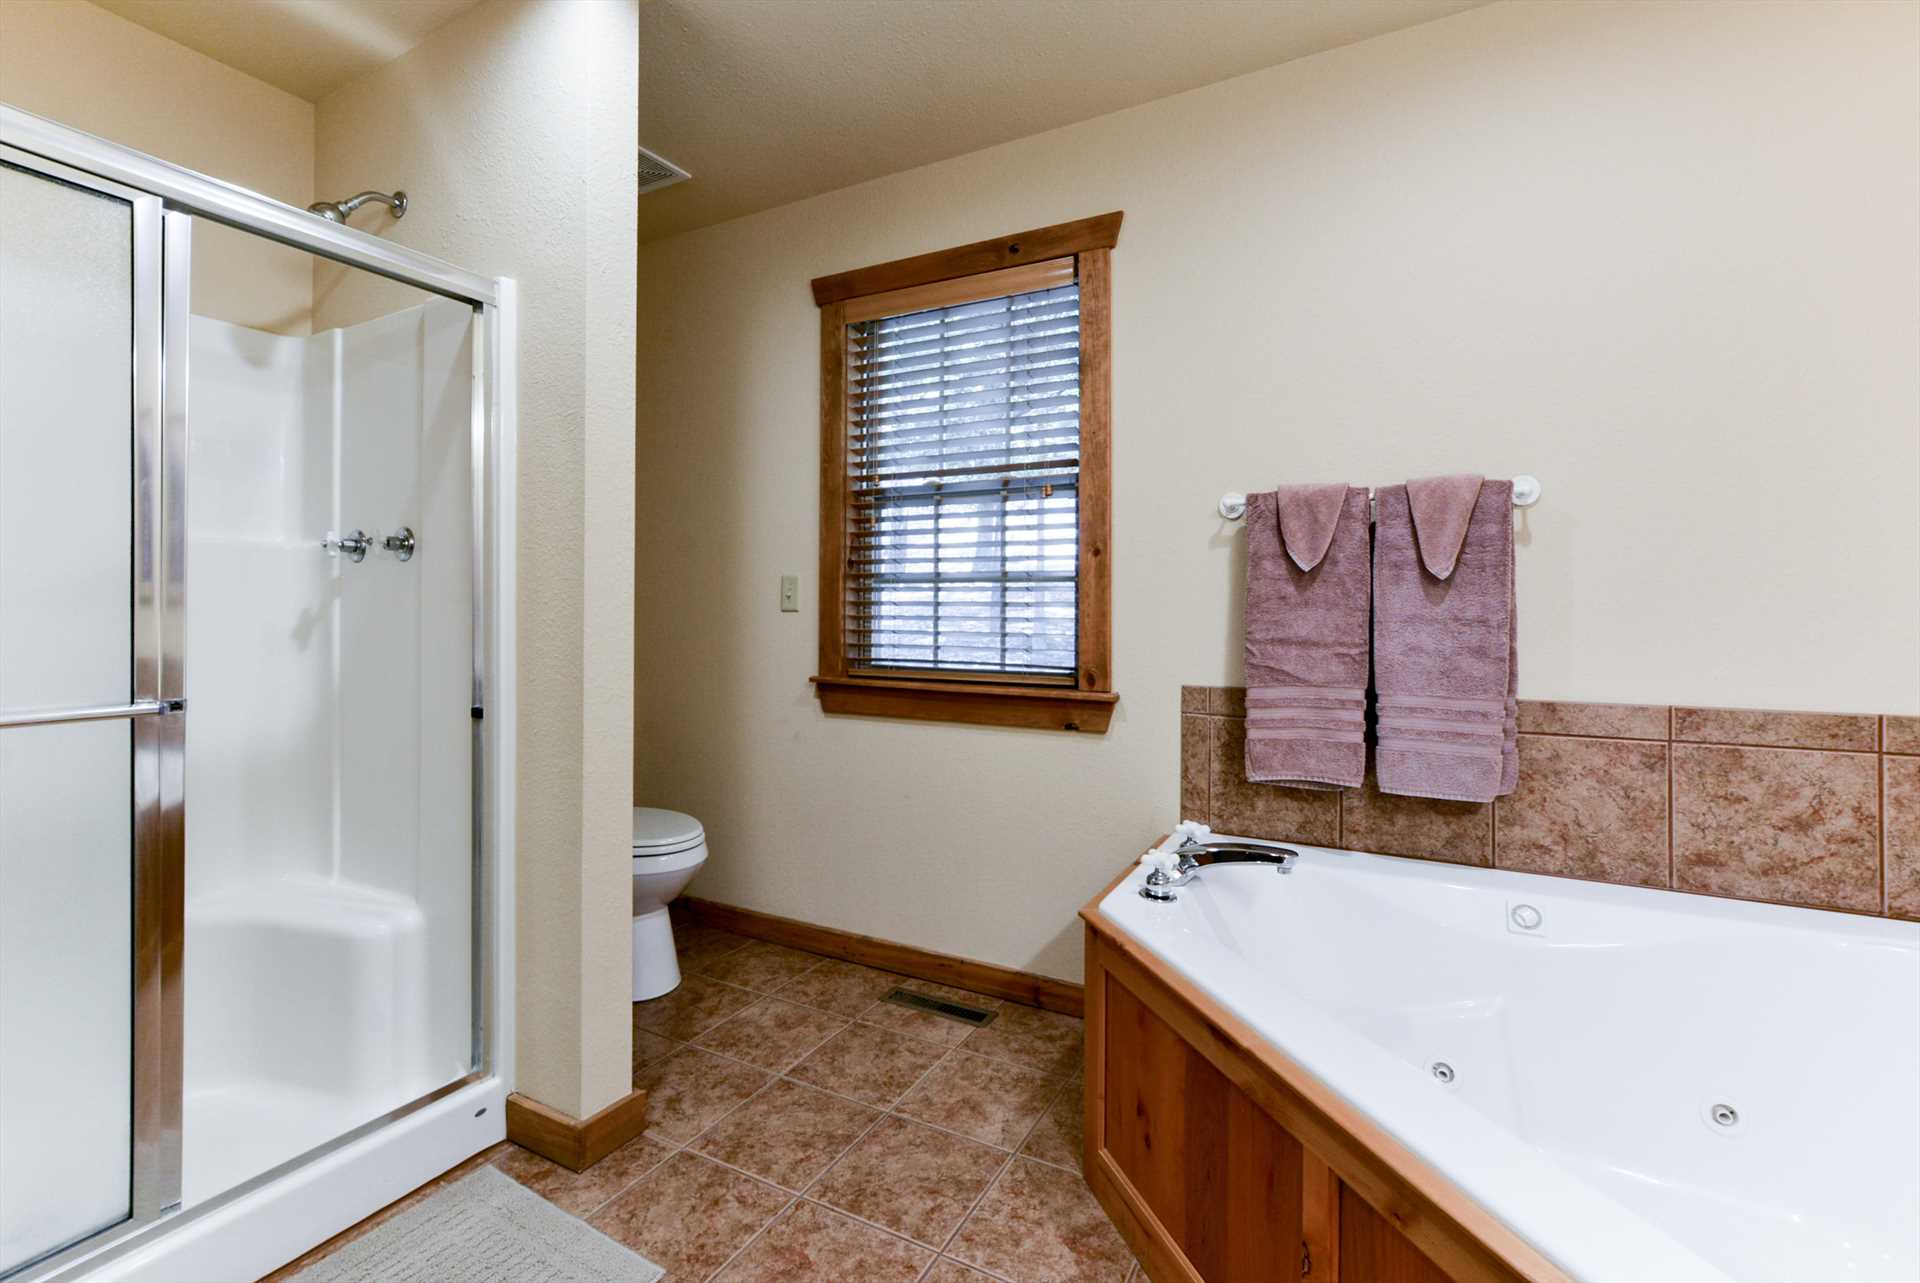 The master bathroom is incredibly spacious.